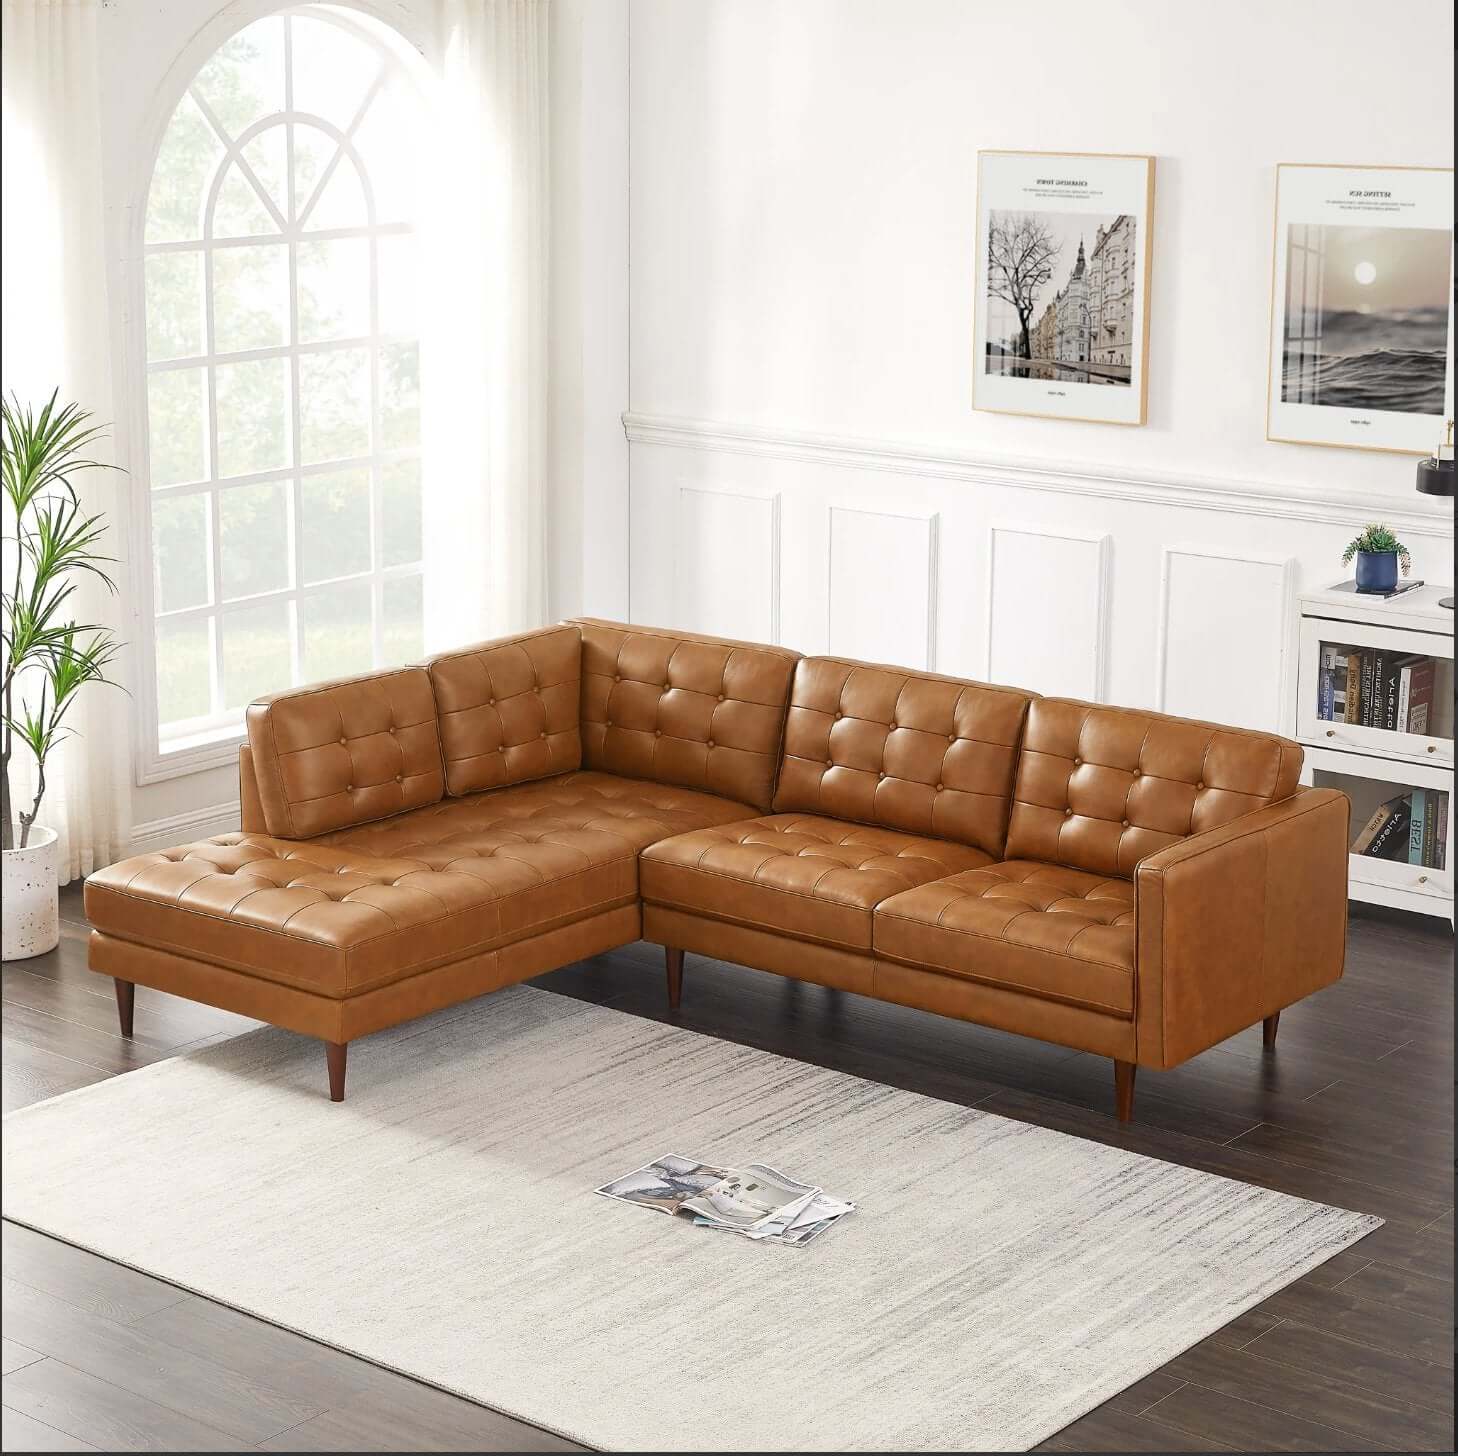 Lucco MCM Style Tufted Leather L-Shape Sectional Chaise Sofa - Revel Sofa 